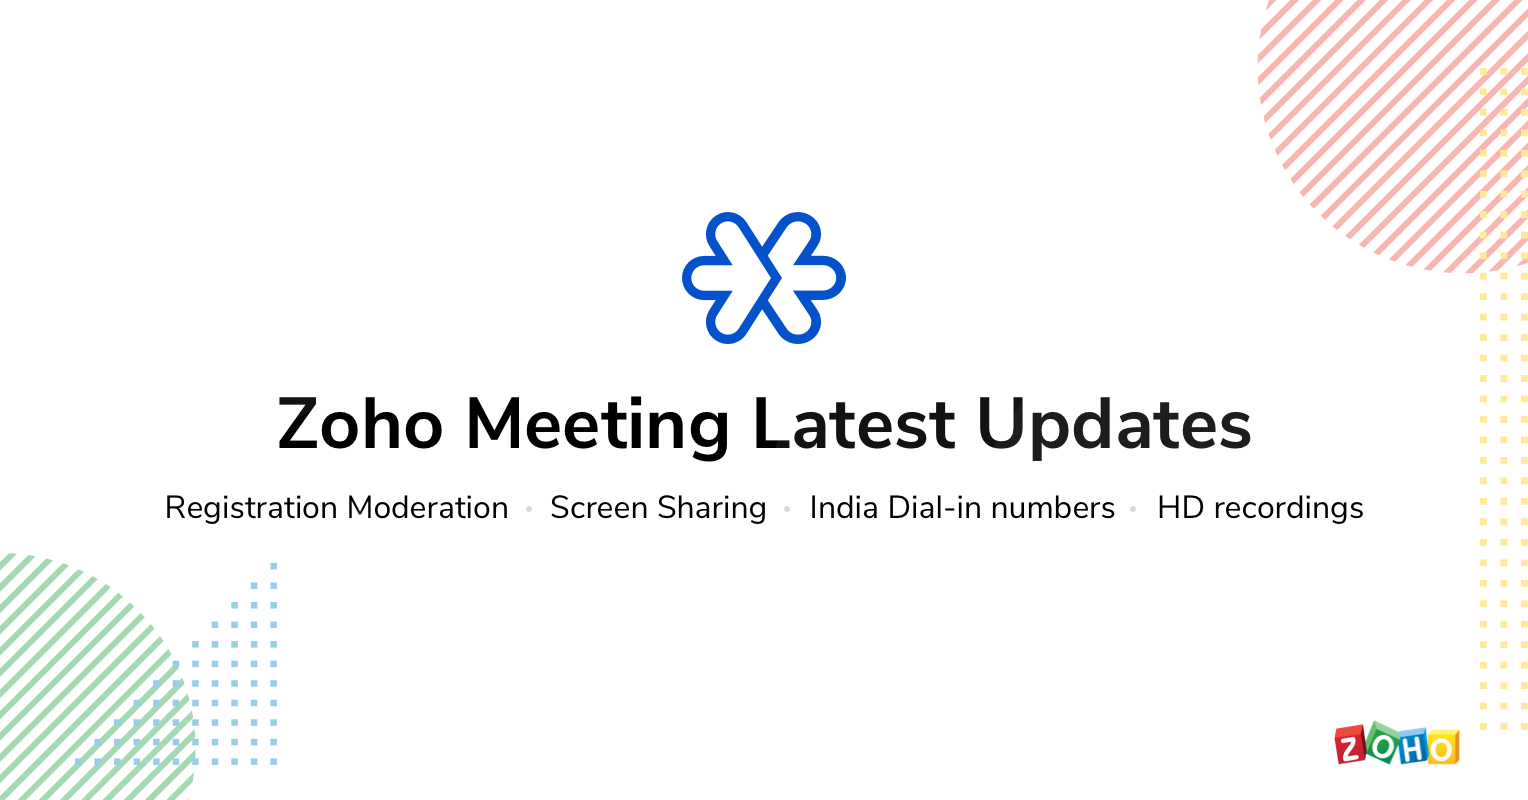 Zoho Meeting Latest Updates: Registration Moderation for webinars, Screen Sharing for meetings, Dial-in numbers for India, and HD recordings.